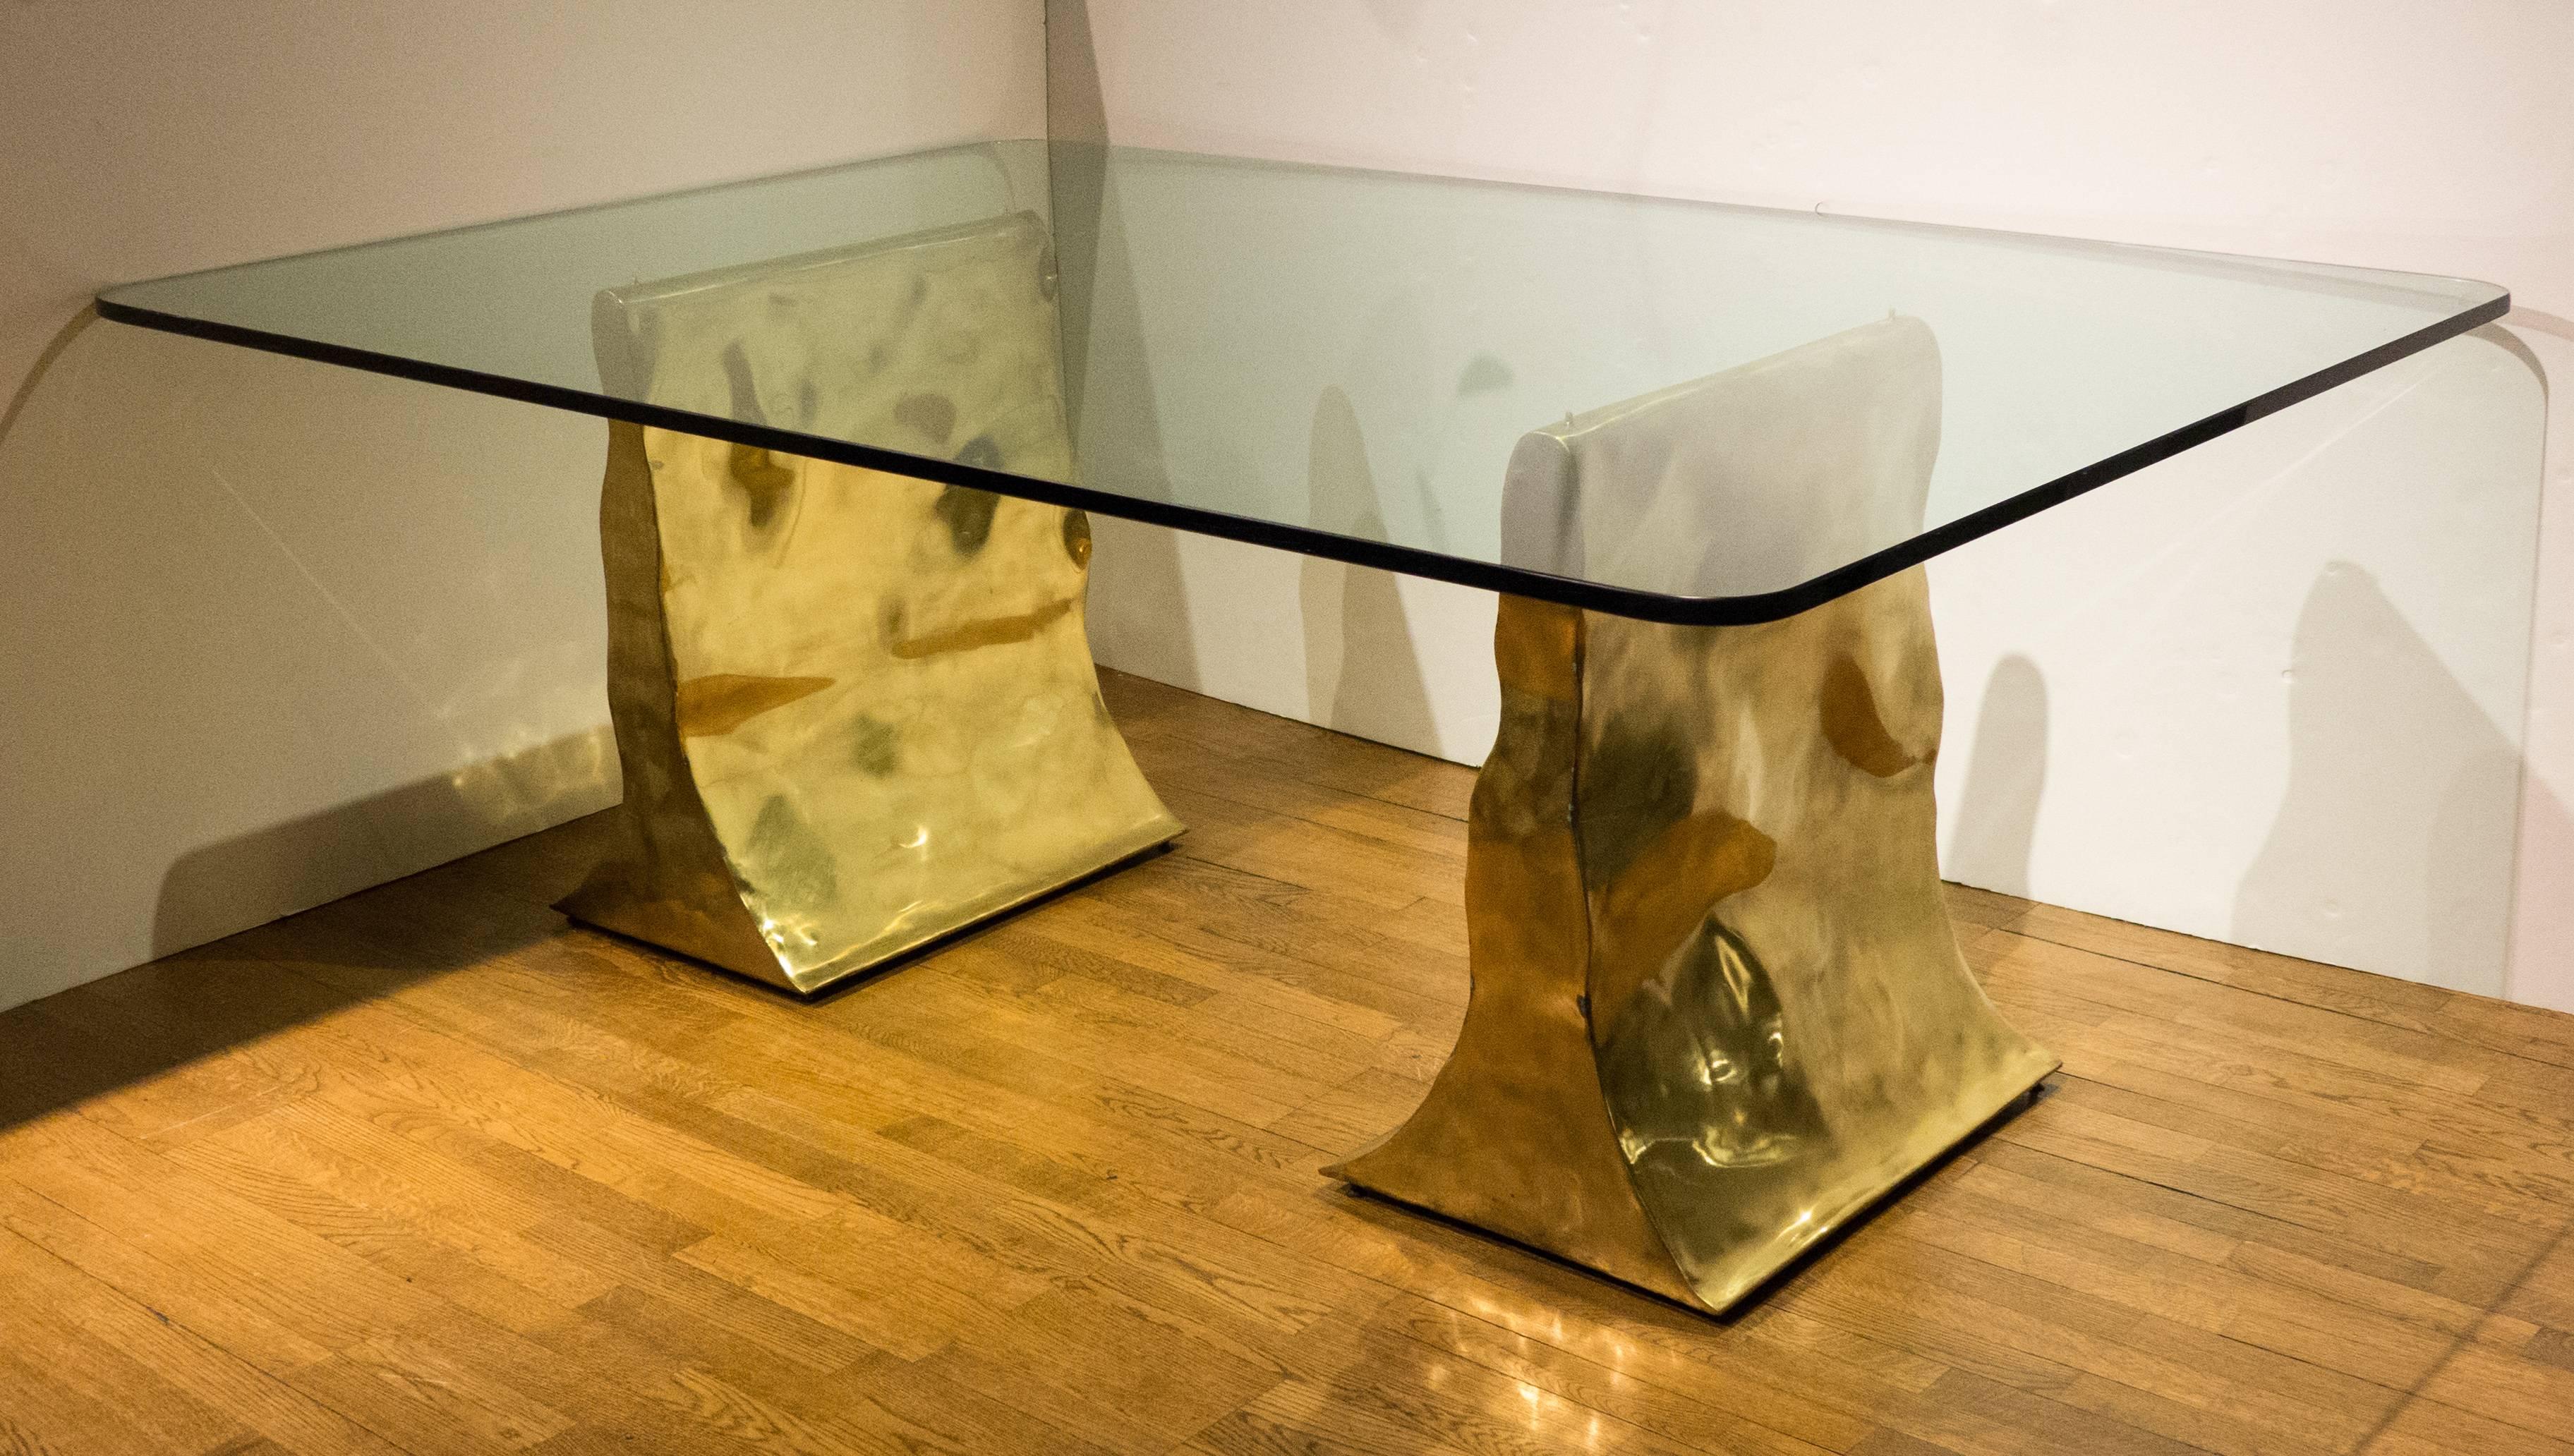 Dining table comprising two sculptural brass bases with a large three-quarter inch thick glass top with polished edges. A rare and impressive work by New York City artist/artisan Silas Seandel, executed in 1982. Each footed base is a unique